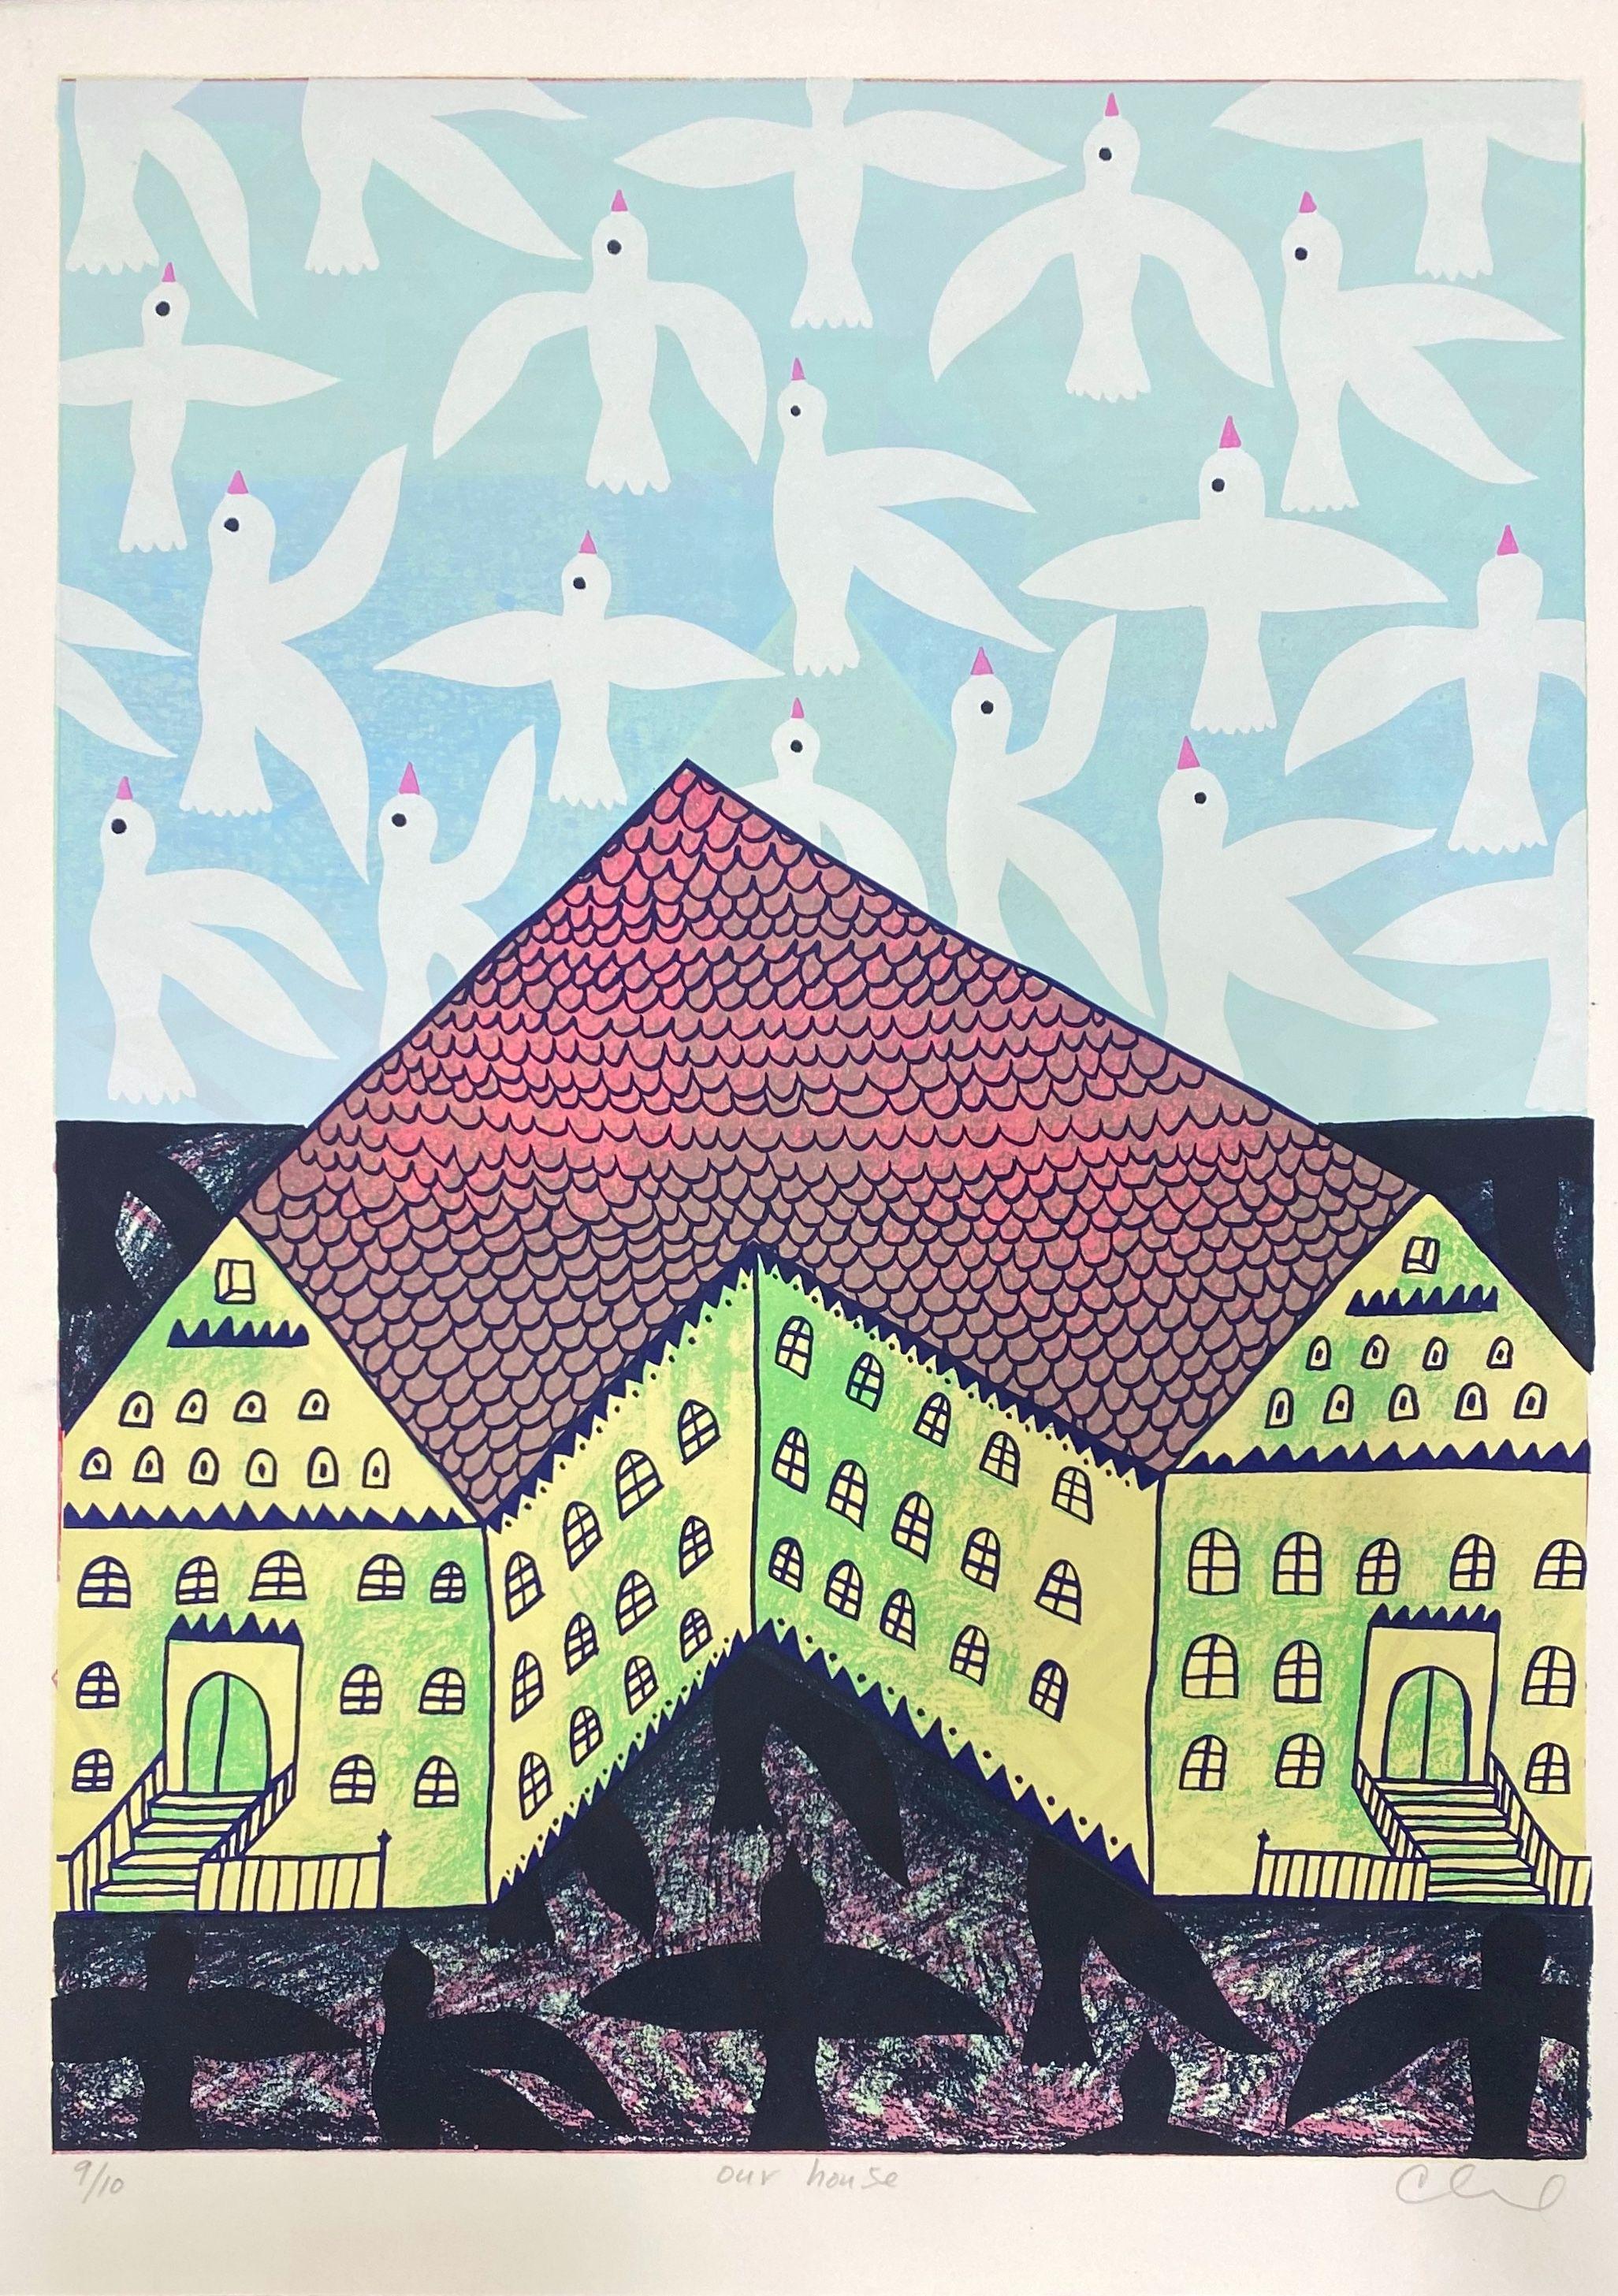 Chadwick Tolley - Our House (2/10) For Sale at 1stDibs